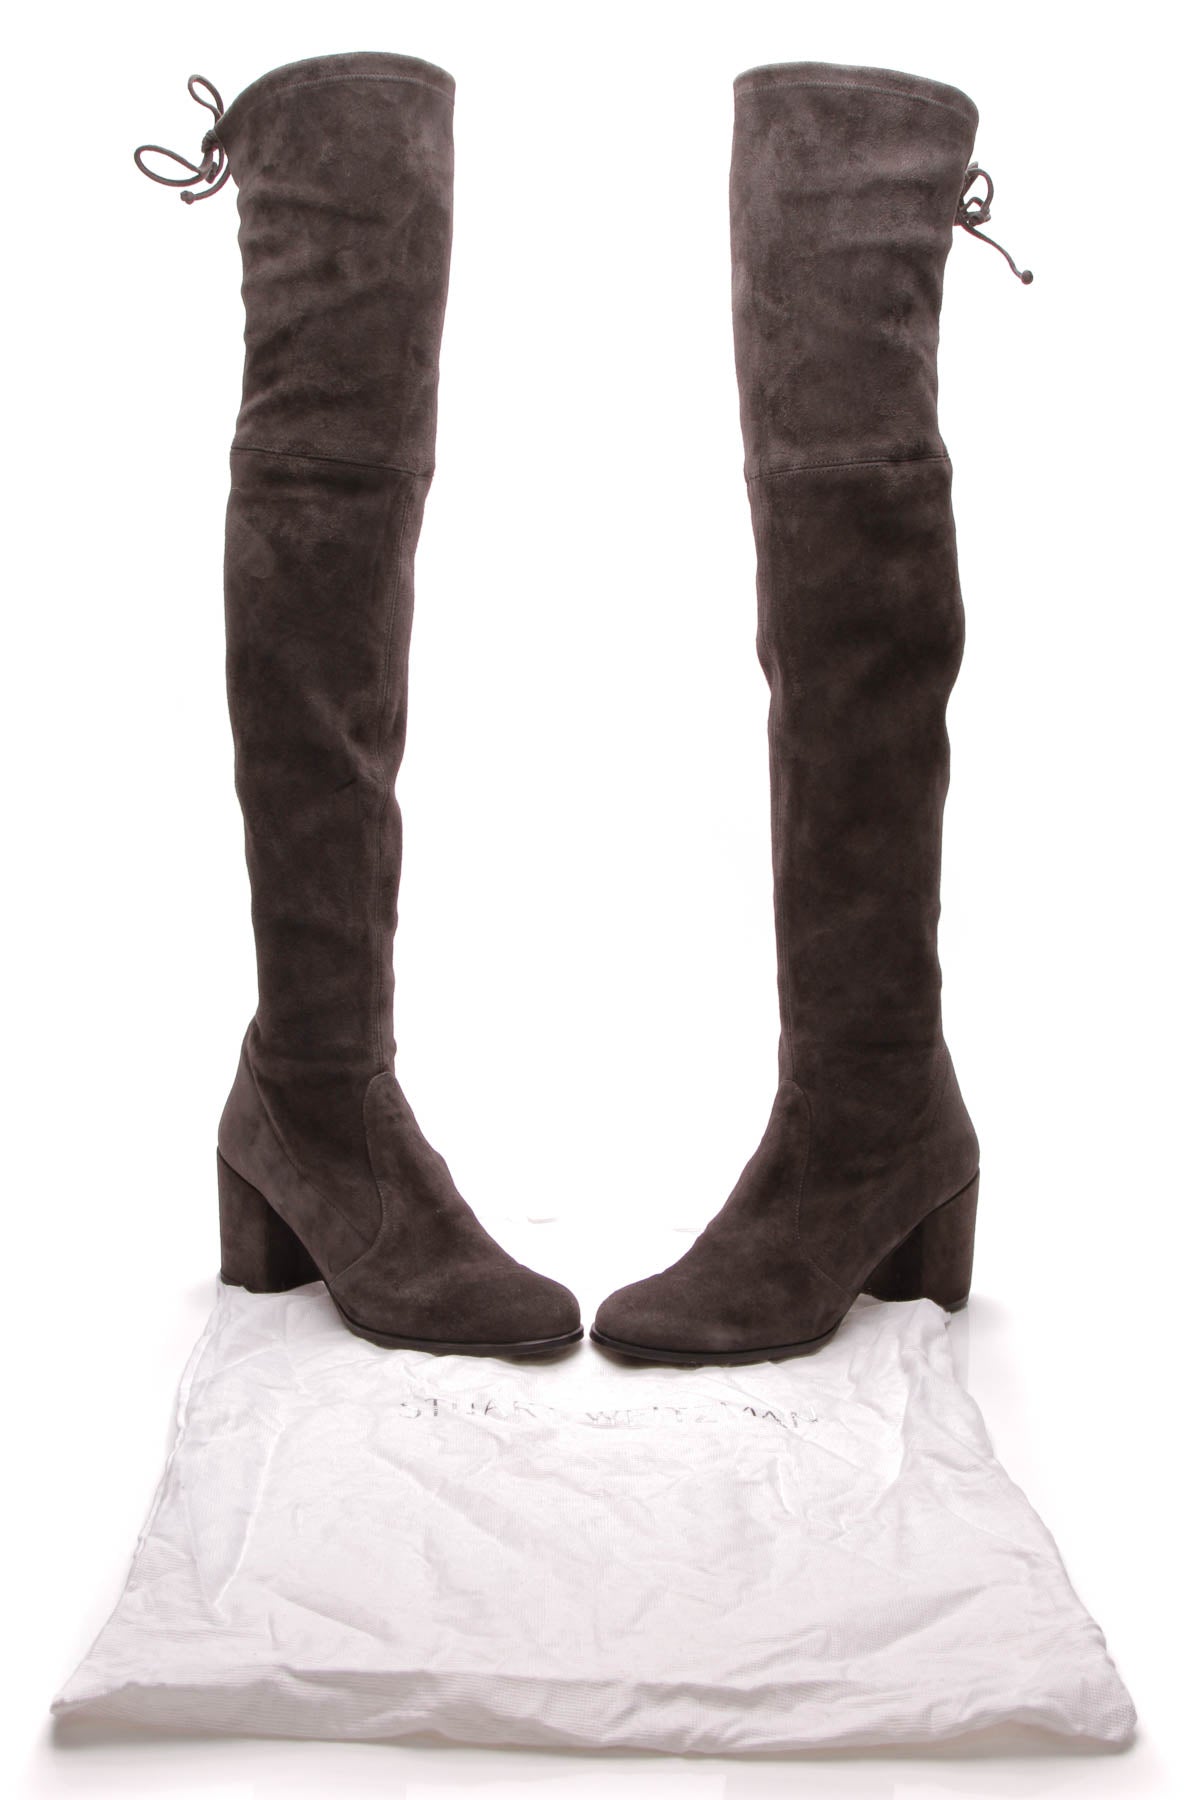 tieland over the knee boot